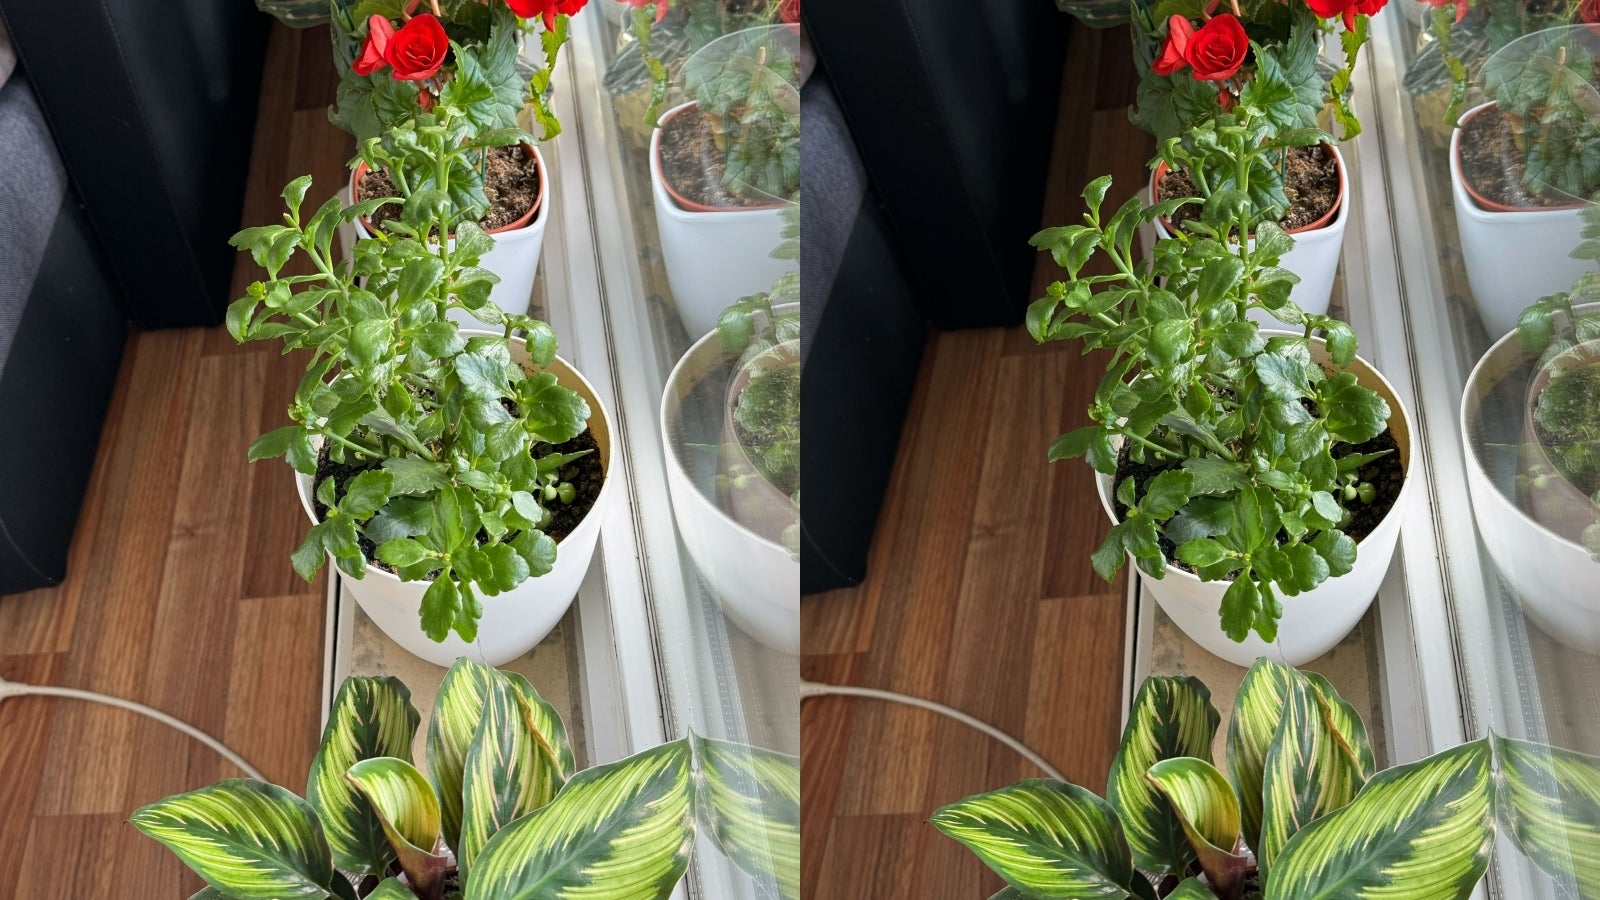 A mild example of overexposing. Left - original iPhone photo. Right - Brightness set to -30, Brilliance set to -20, Saturation set to -5. - These new iPhone camera tricks will change the way you take photos and videos forever!